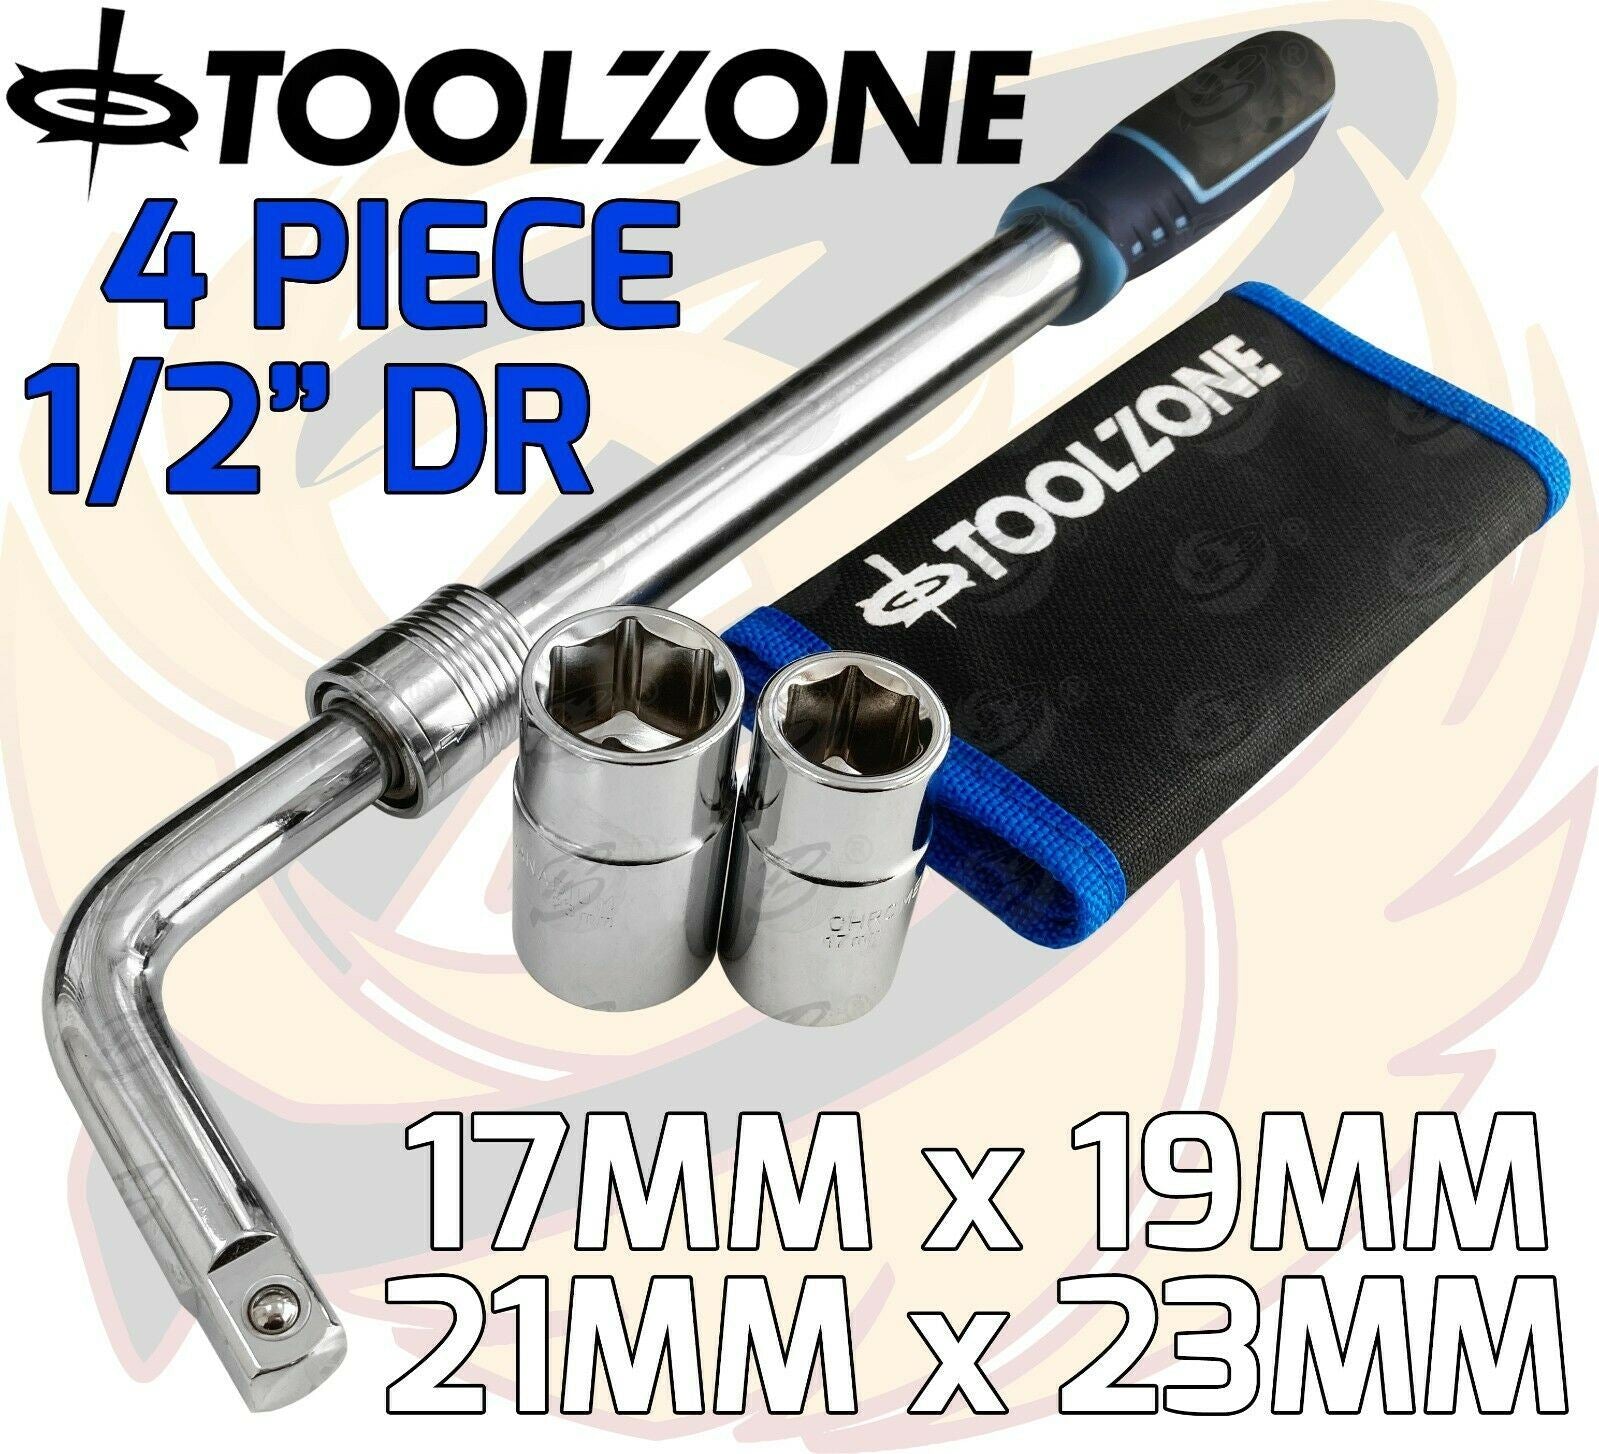 TOOLZONE 1/2" DRIVE EXTENDABLE TYRE WRENCH 17MM - 23MM